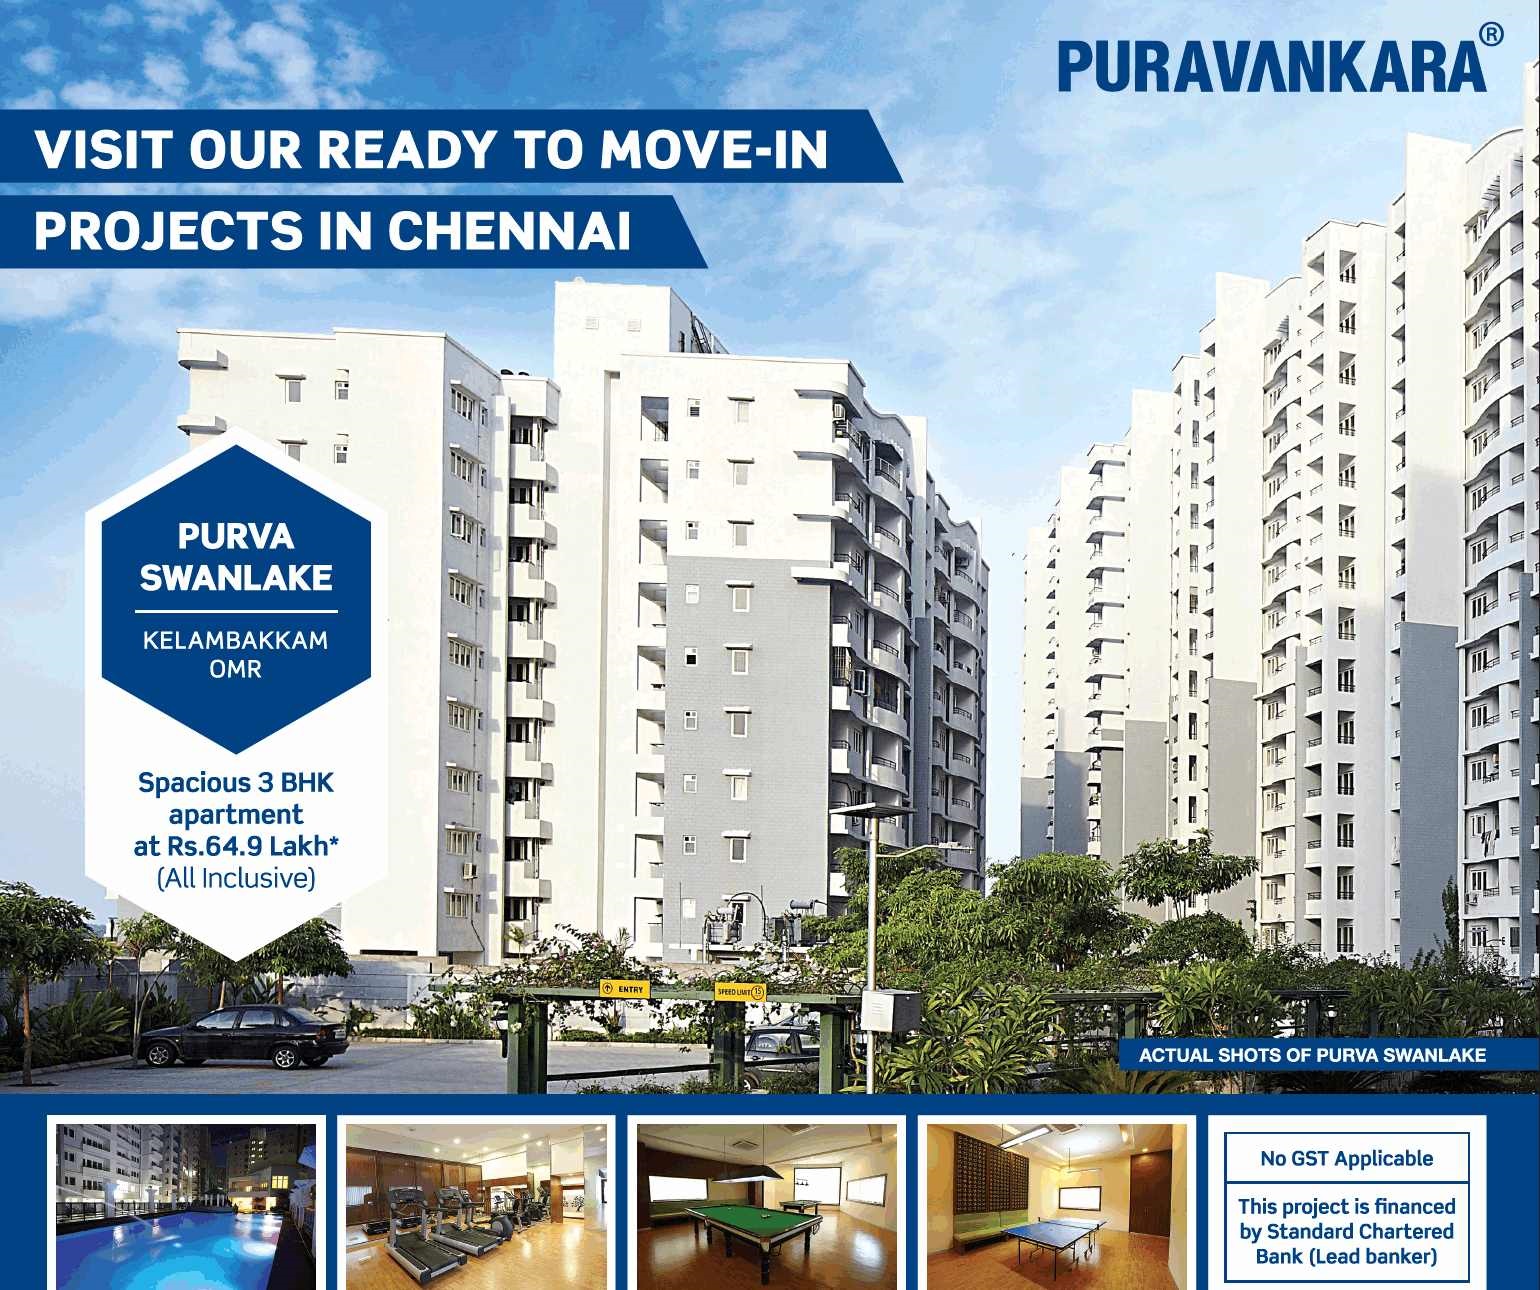 Book ready to move in spacious 3 bhk apartments at Purva Swanlake in Chennai Update